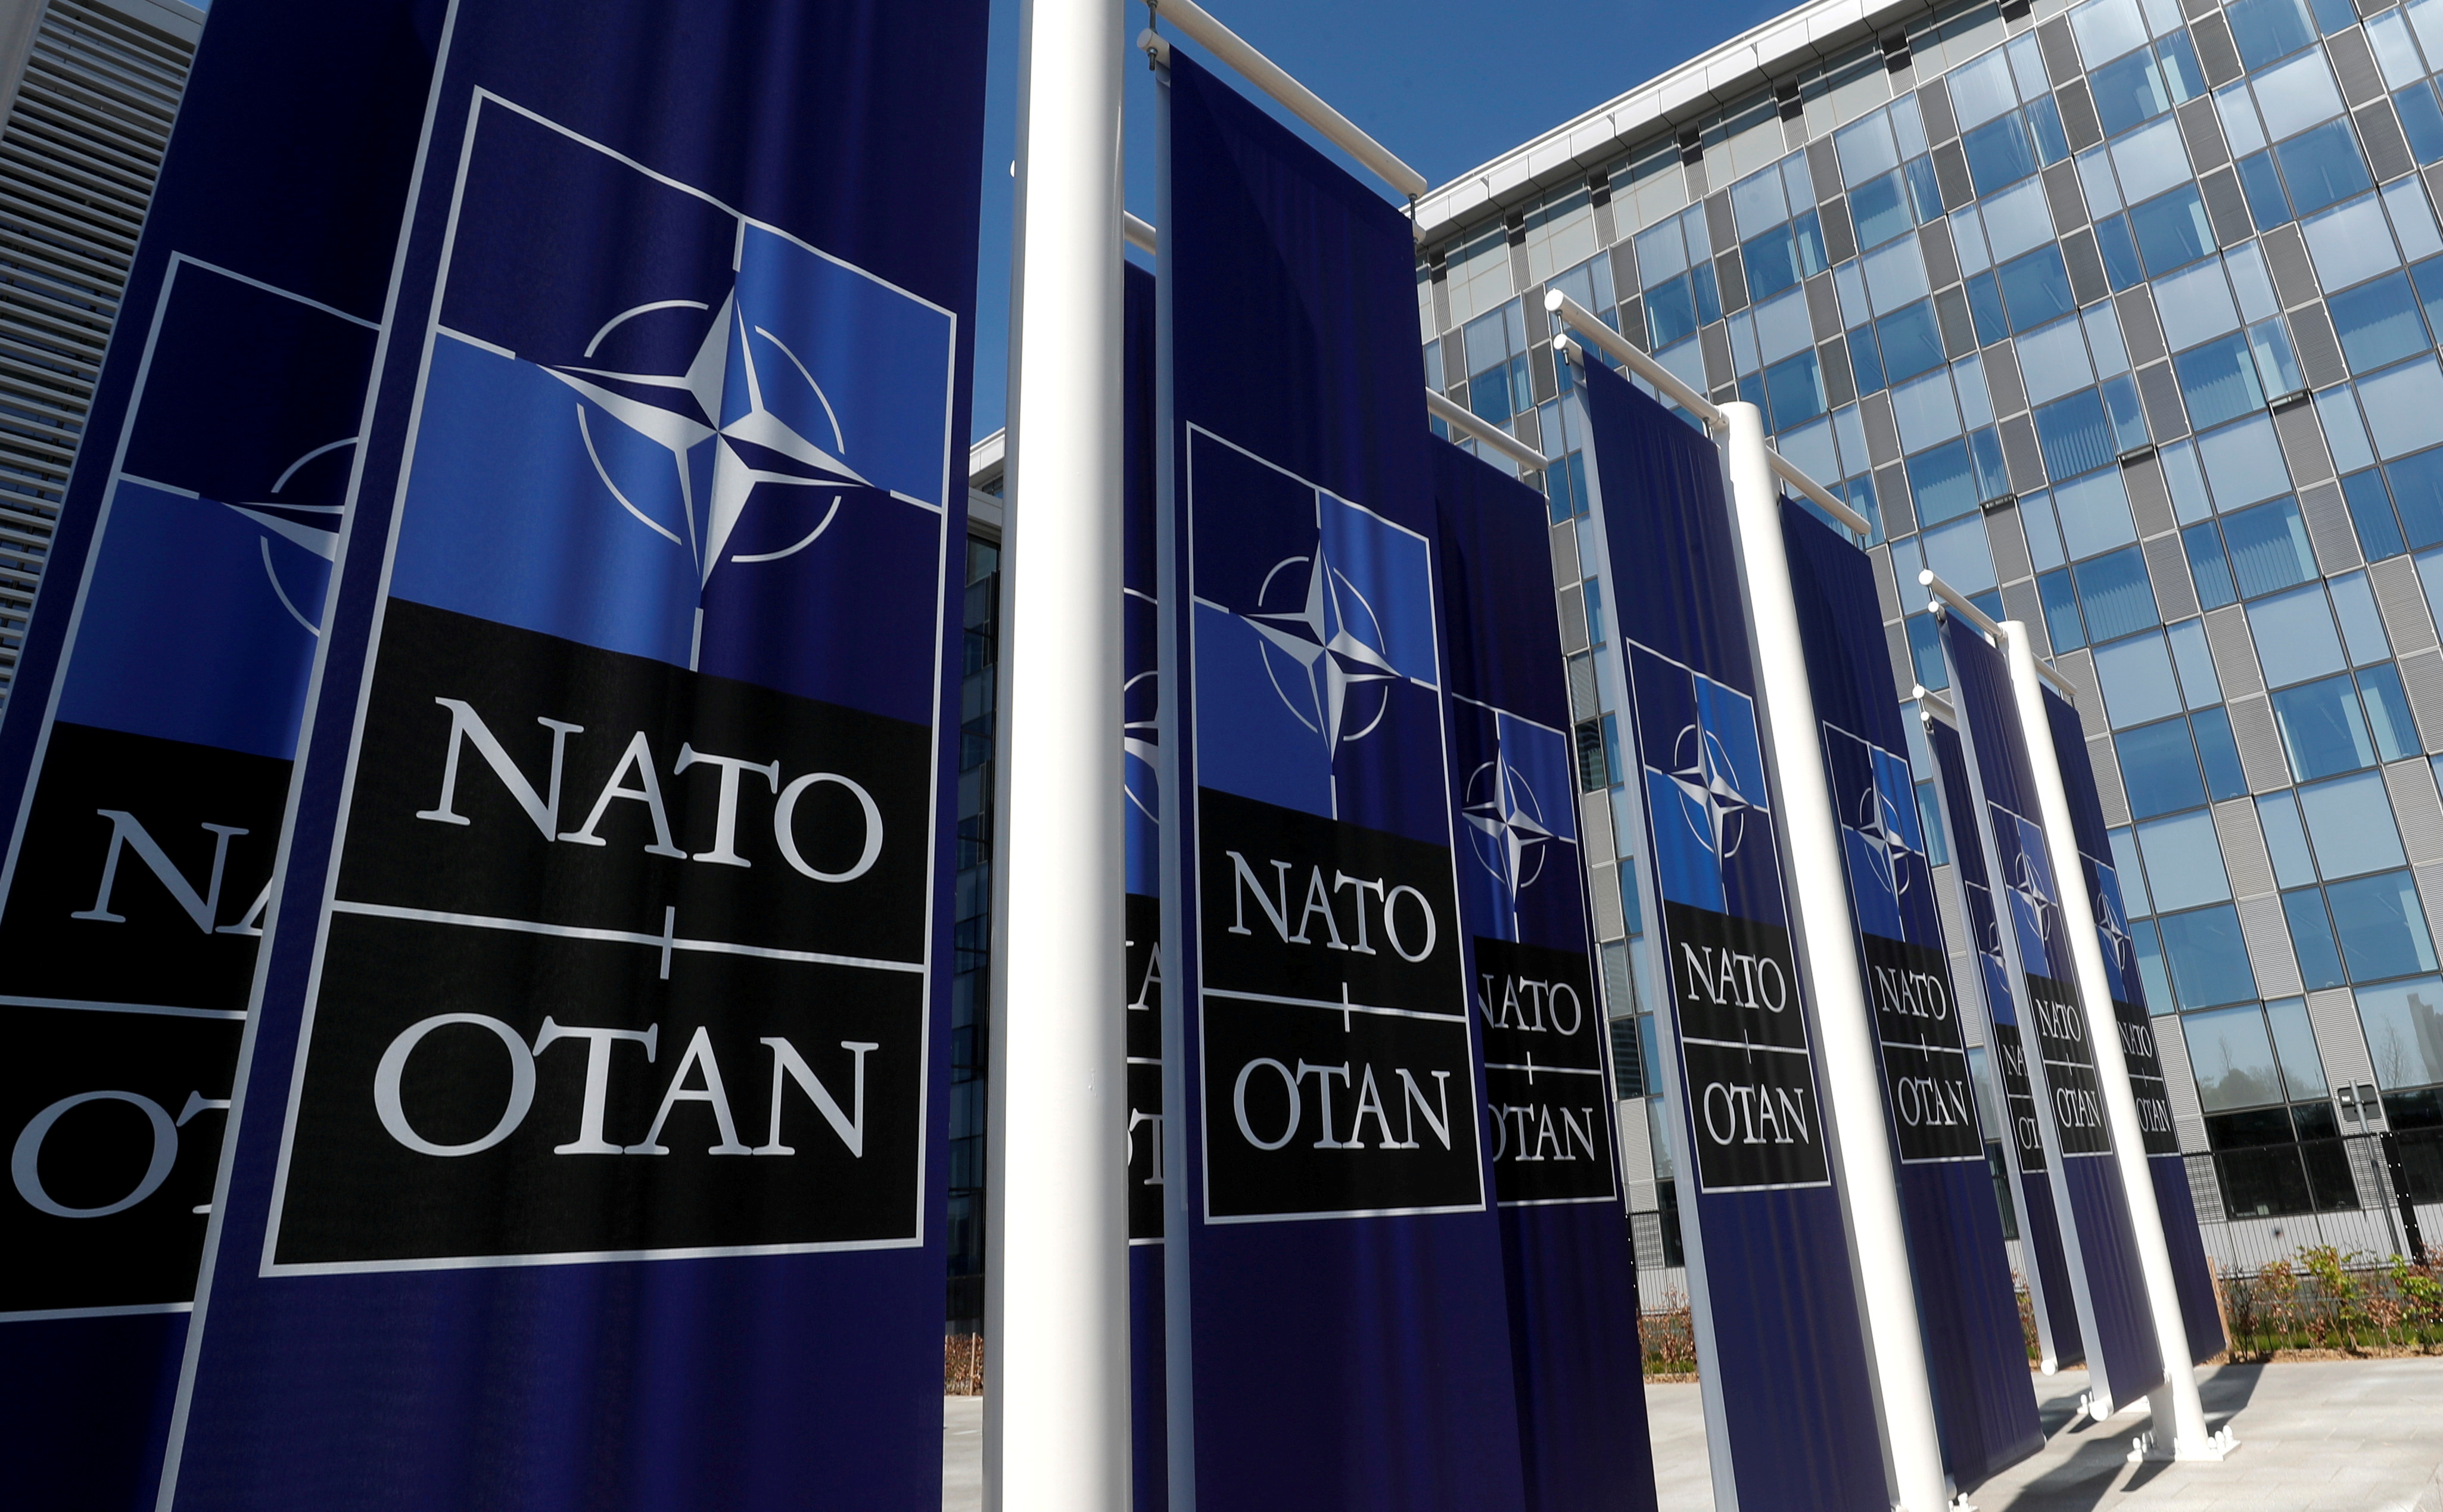 Banners displaying the NATO logo are placed at the entrance of the new NATO headquarters during the move to the new building, in Brussels, Belgium April 19, 2018.  REUTERS/Yves Herman